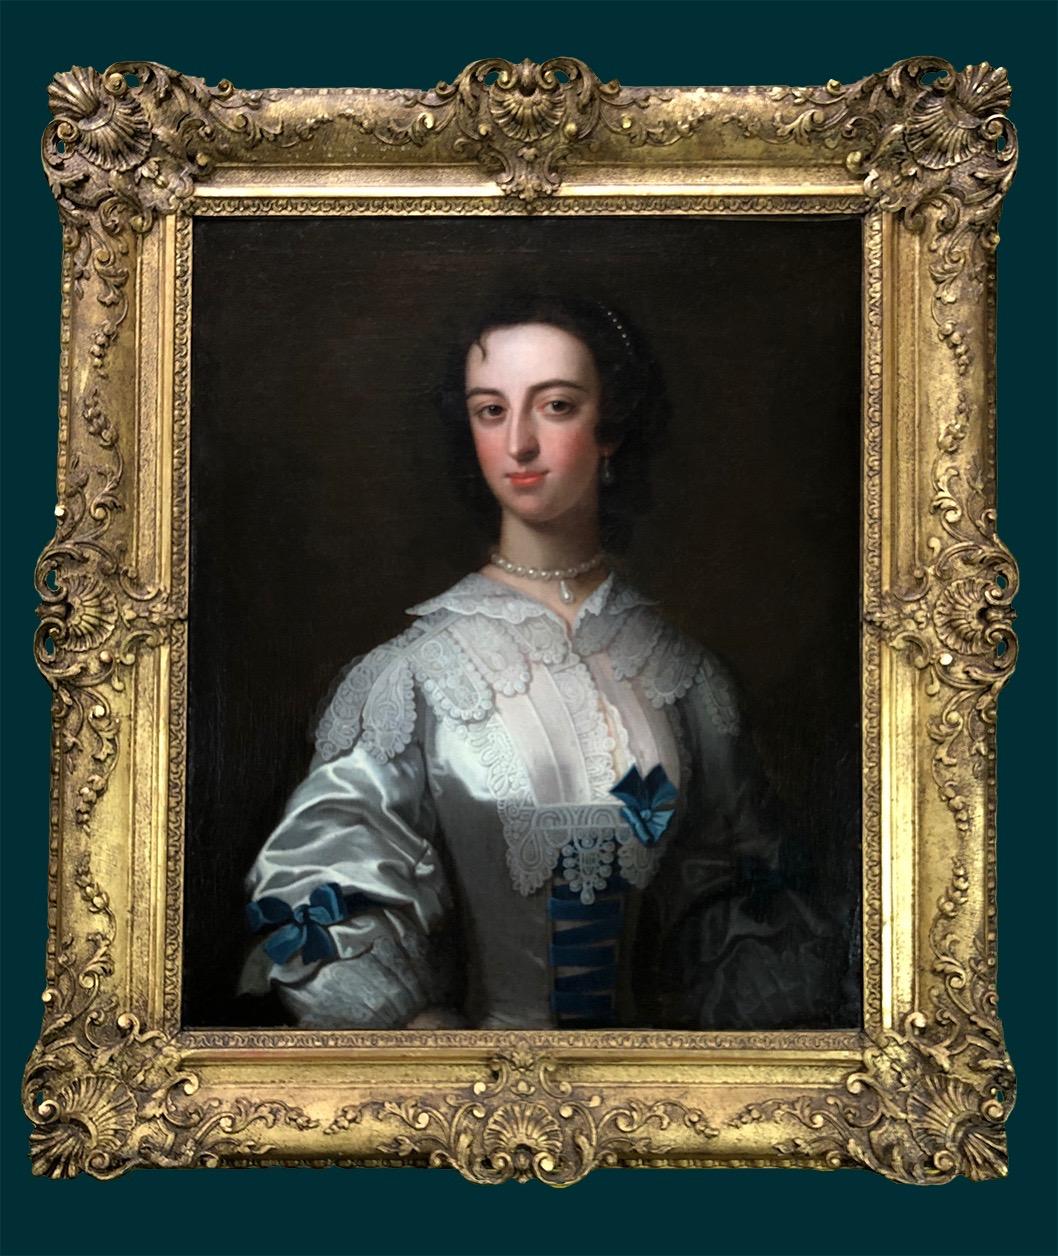 18th Century Portrait of a Lady in an Elaborate Blue and White Costume. 1